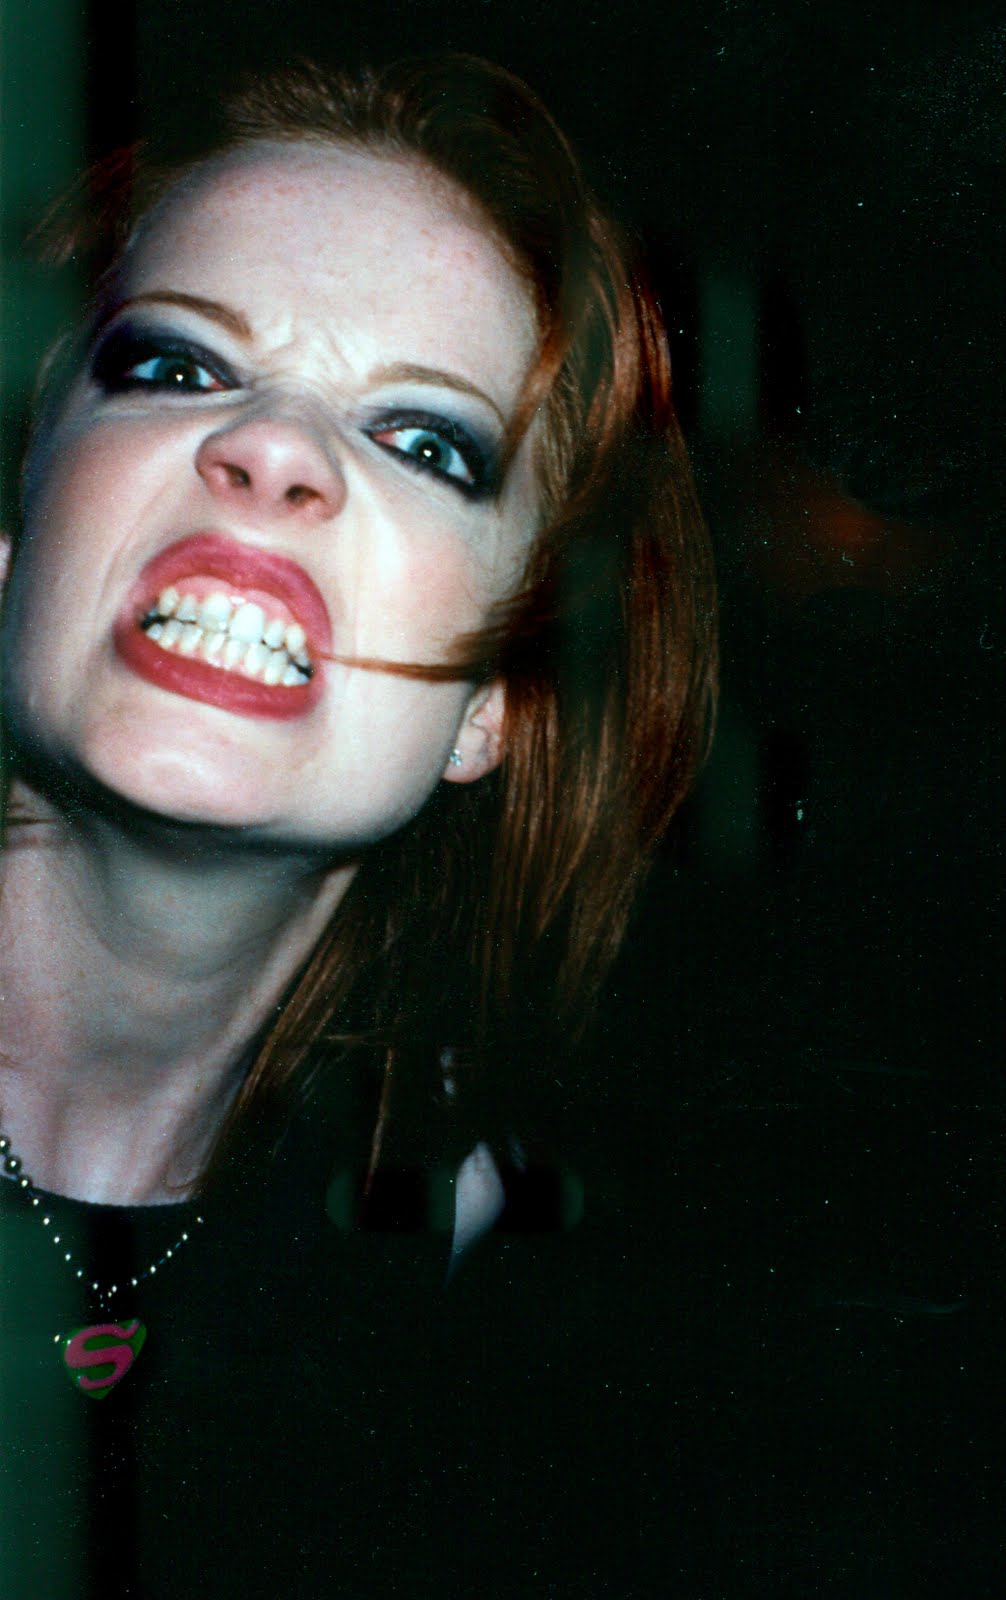 Shirley Manson's quote #6